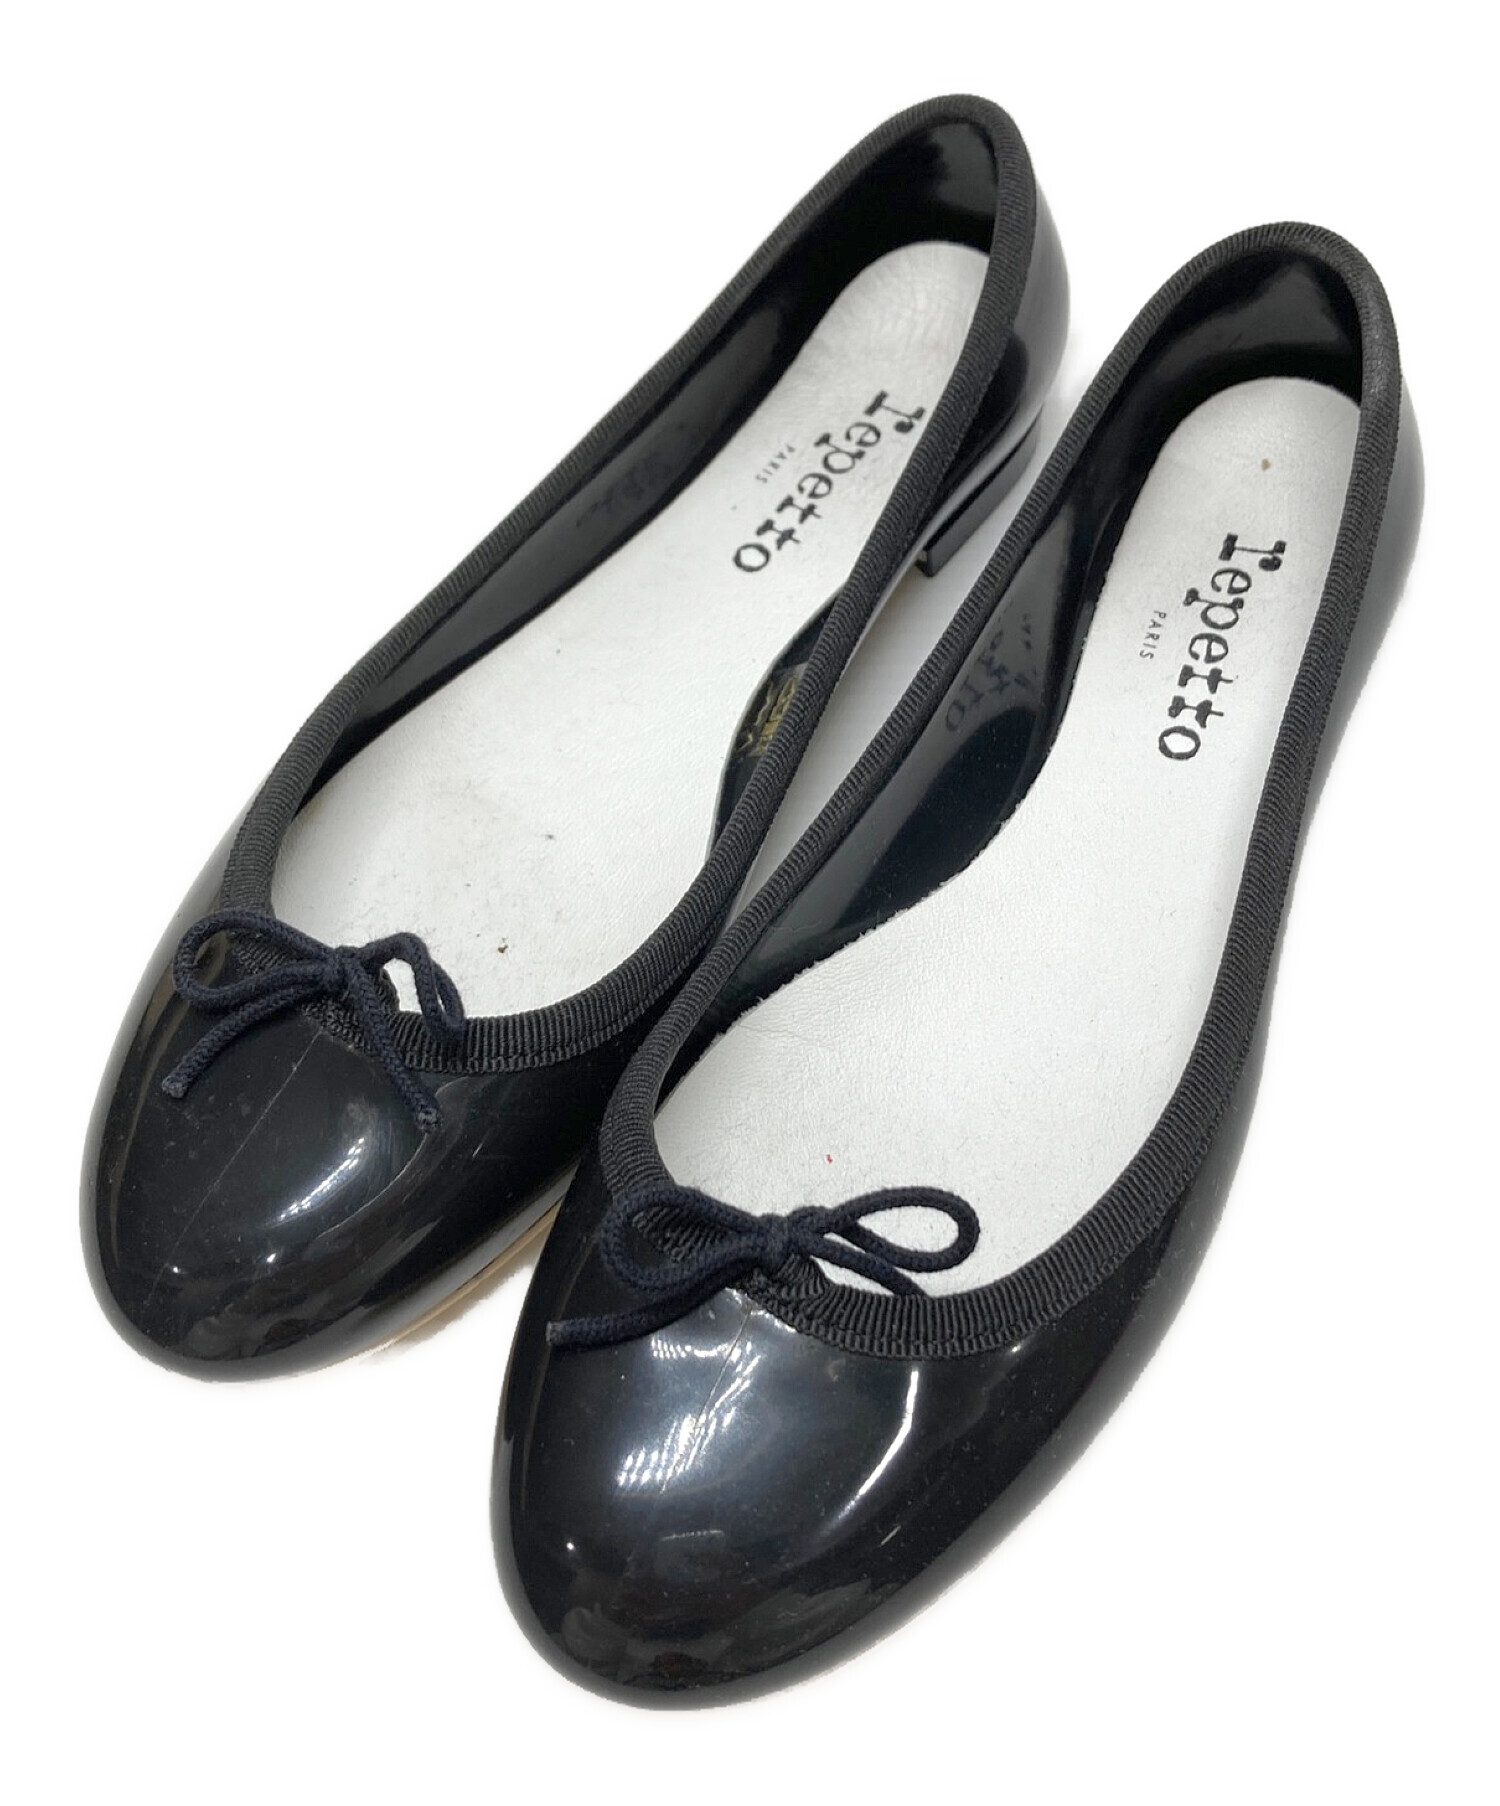 repetto ballet shoes 38.